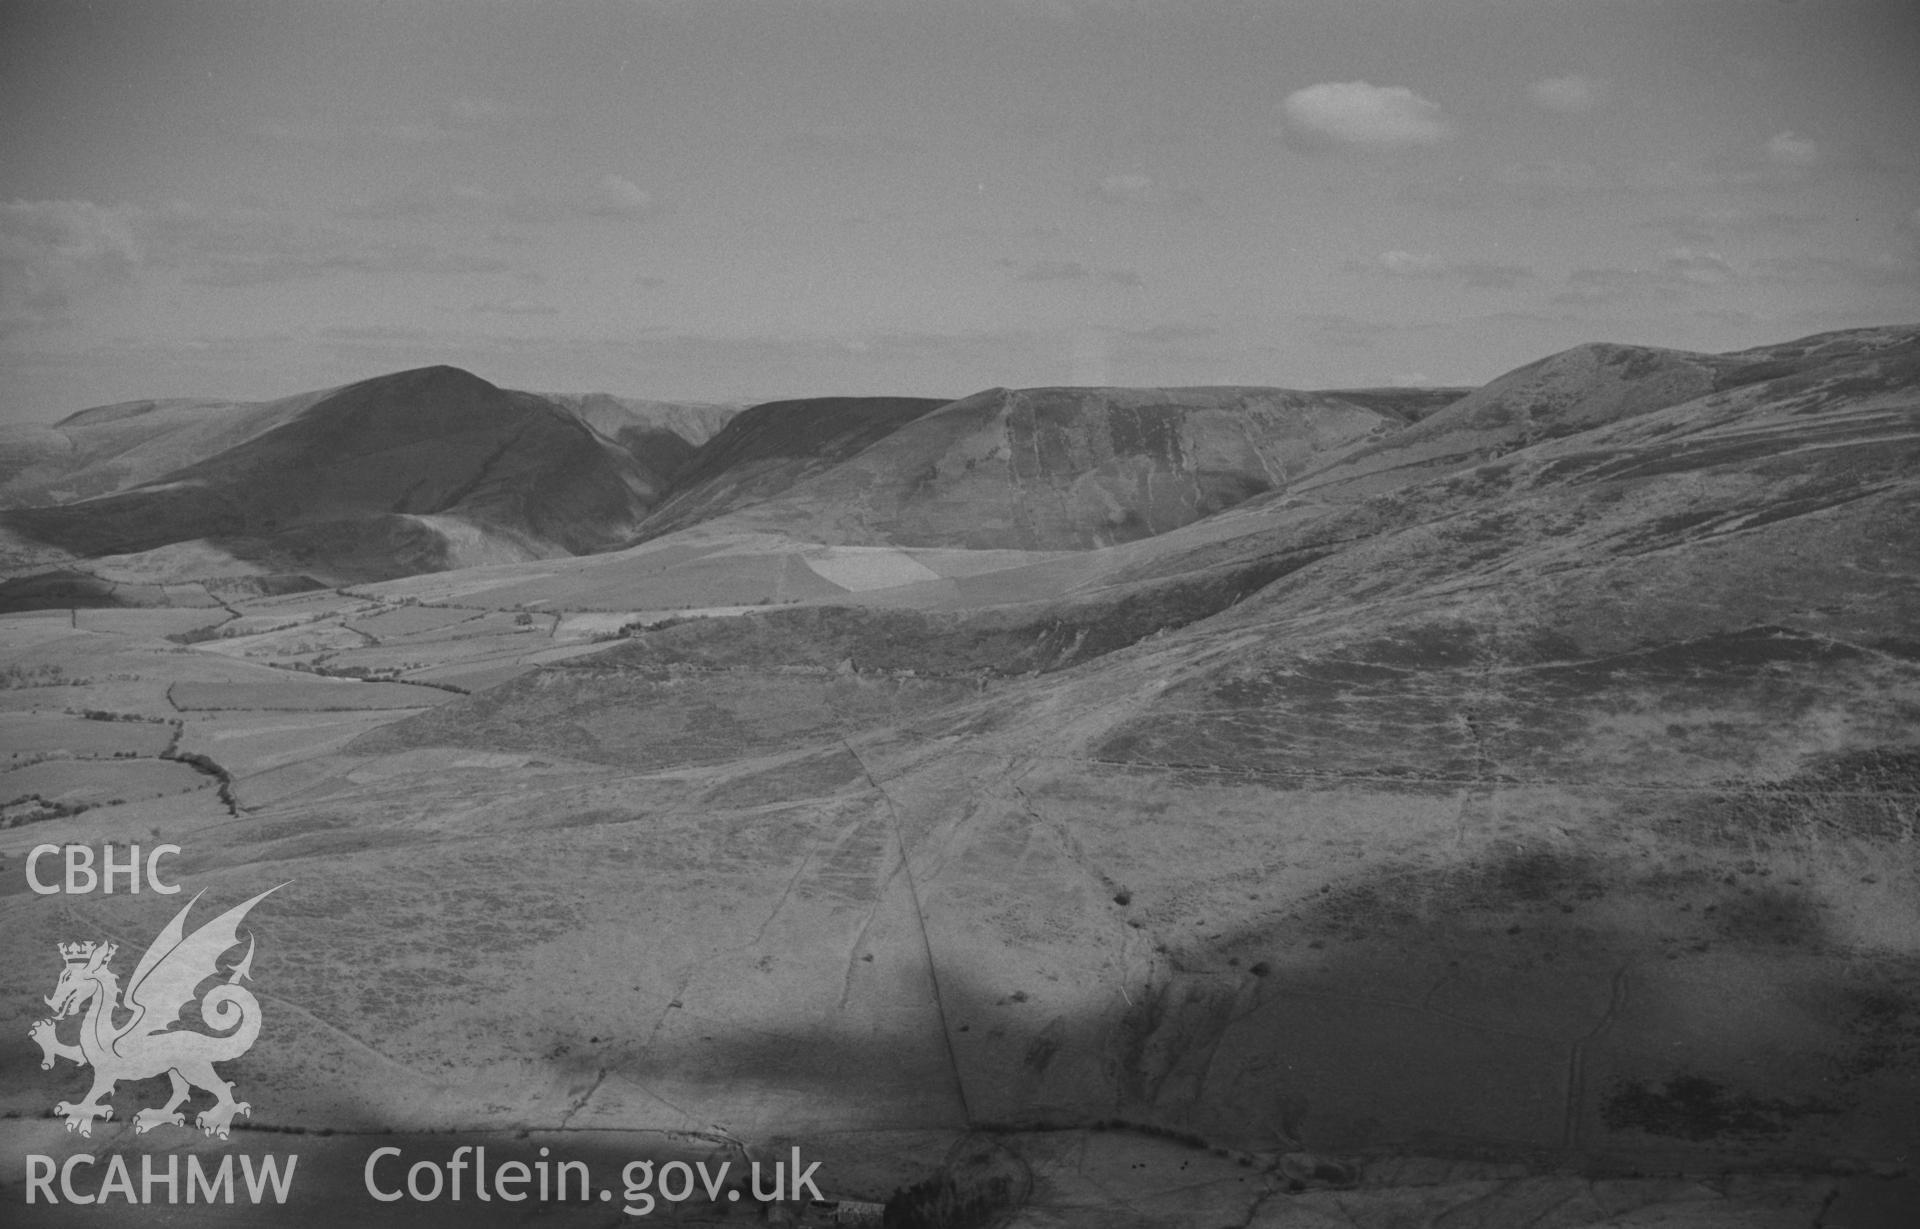 Black and White photograph showing Bwlch Hyddgyn landscape.